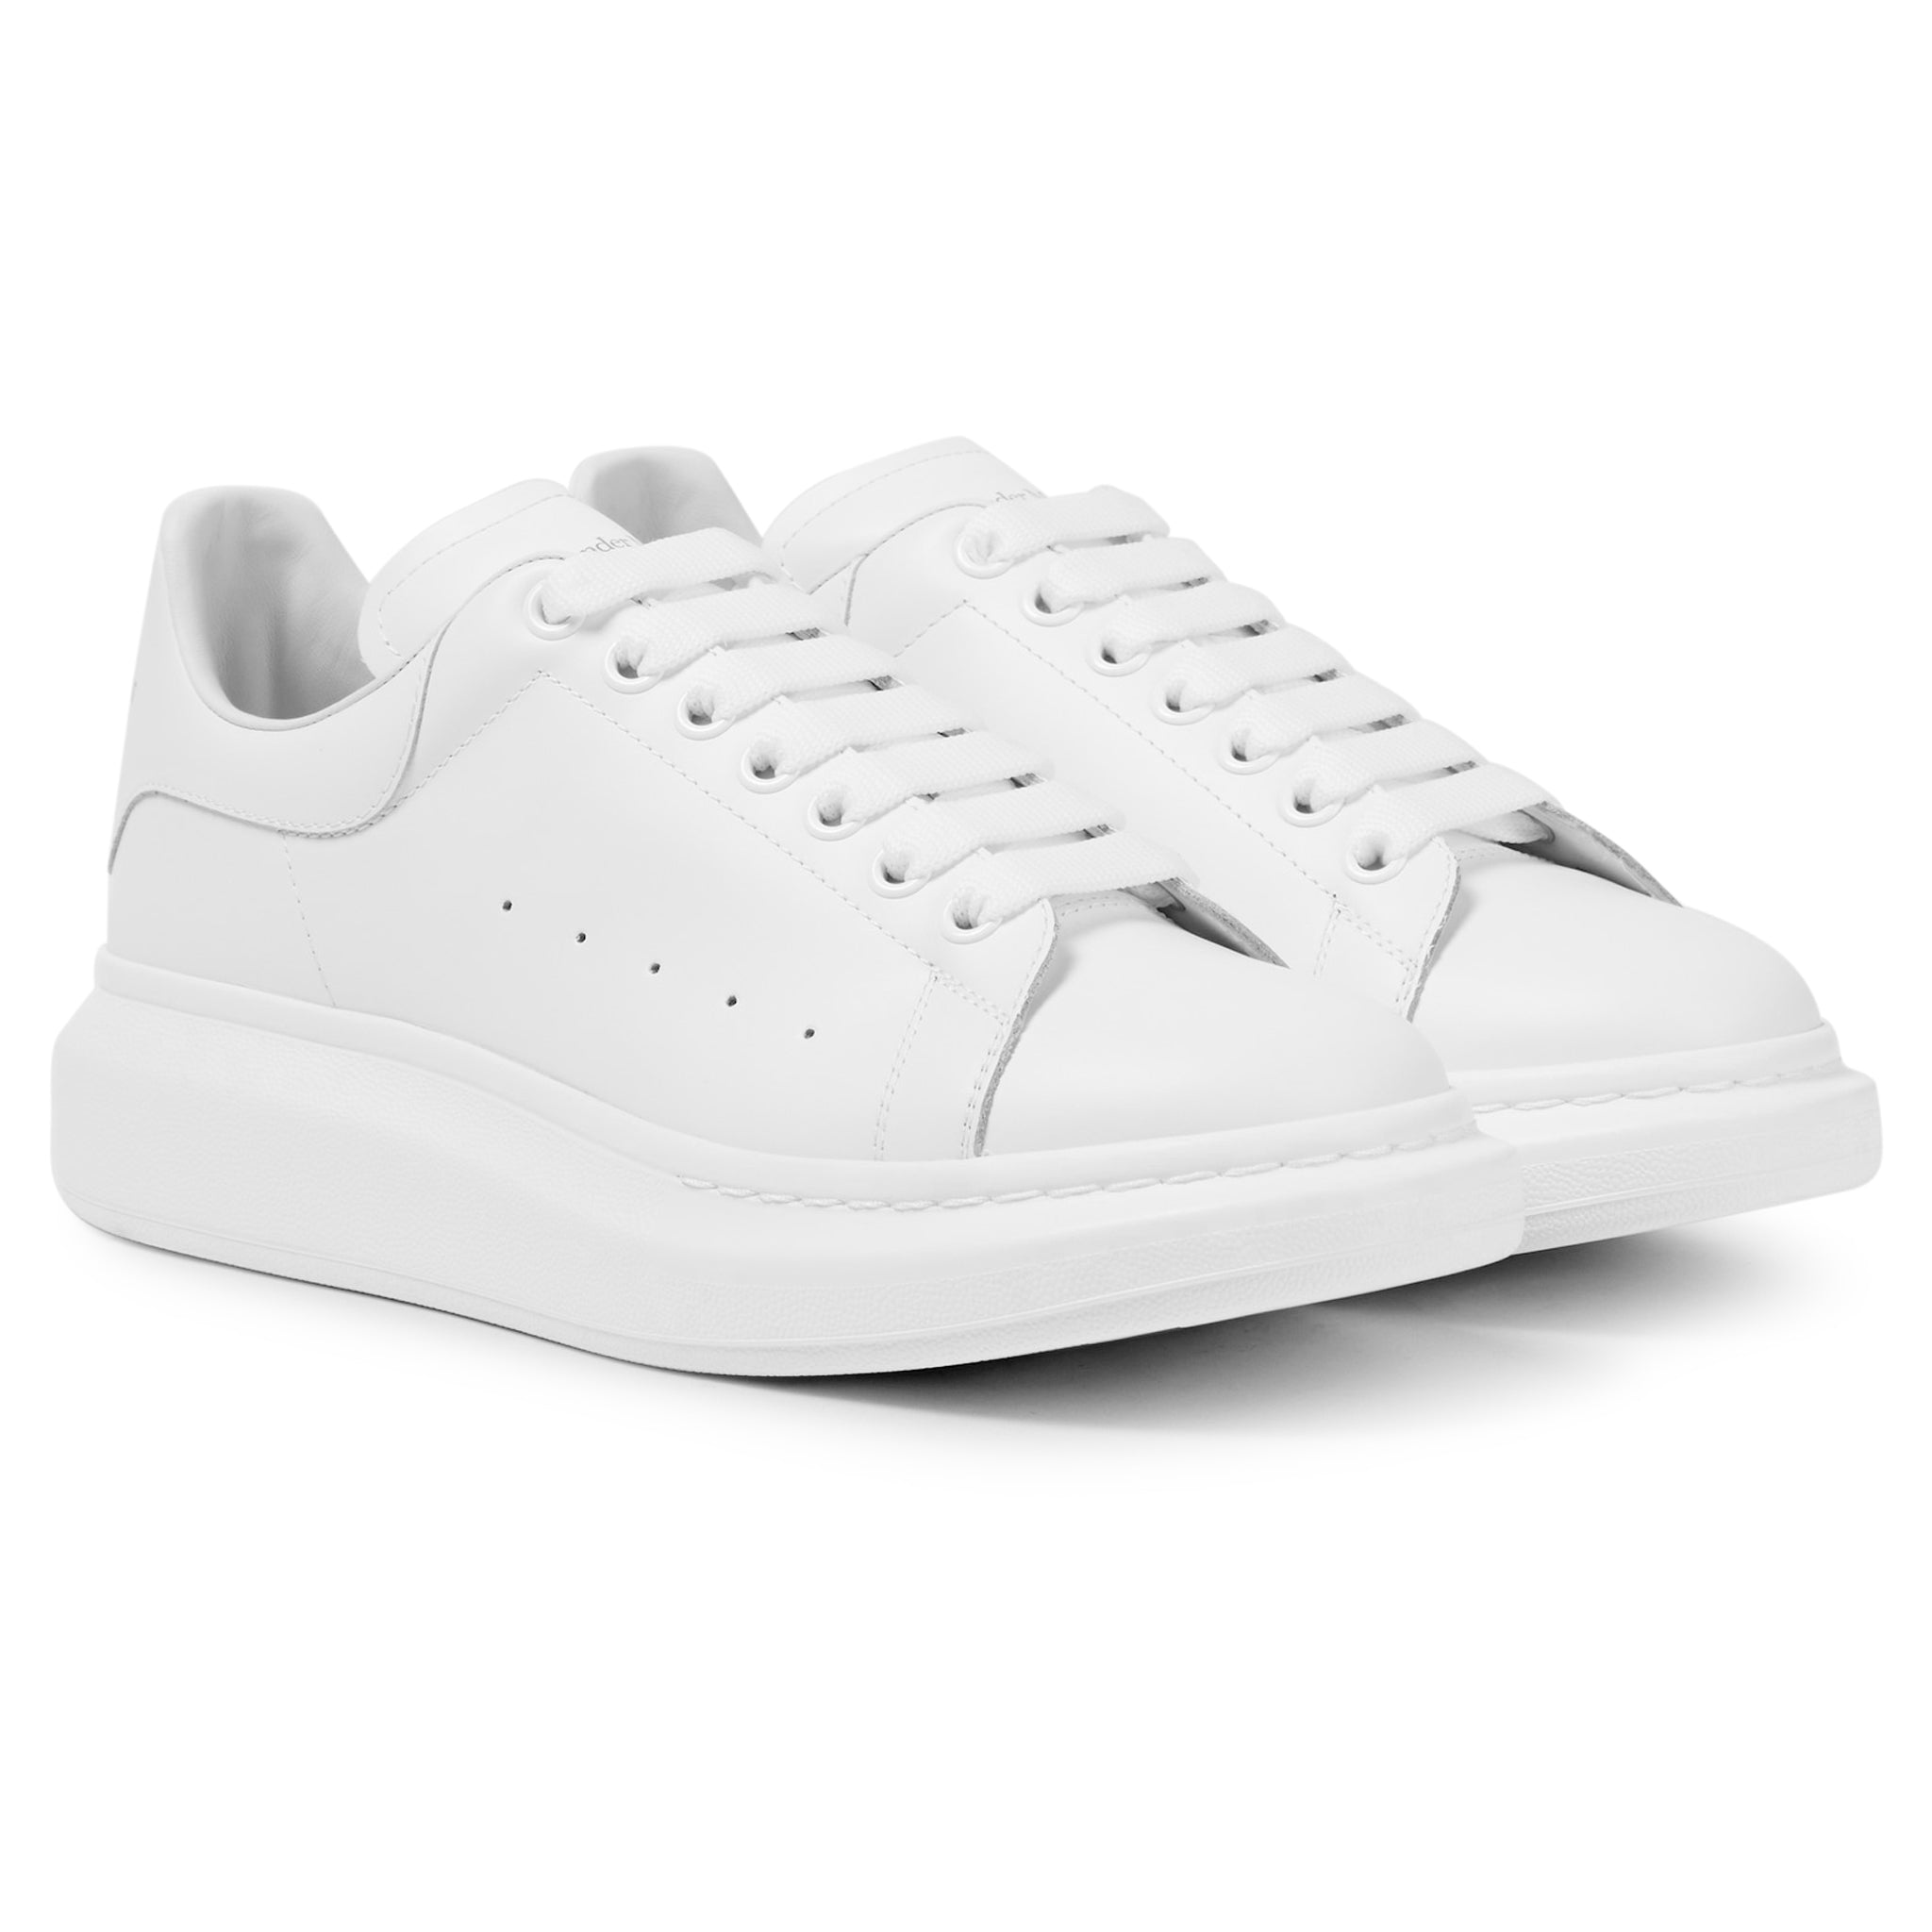 Front side view of Alexander Mcqueen Raised Sole White Sneaker